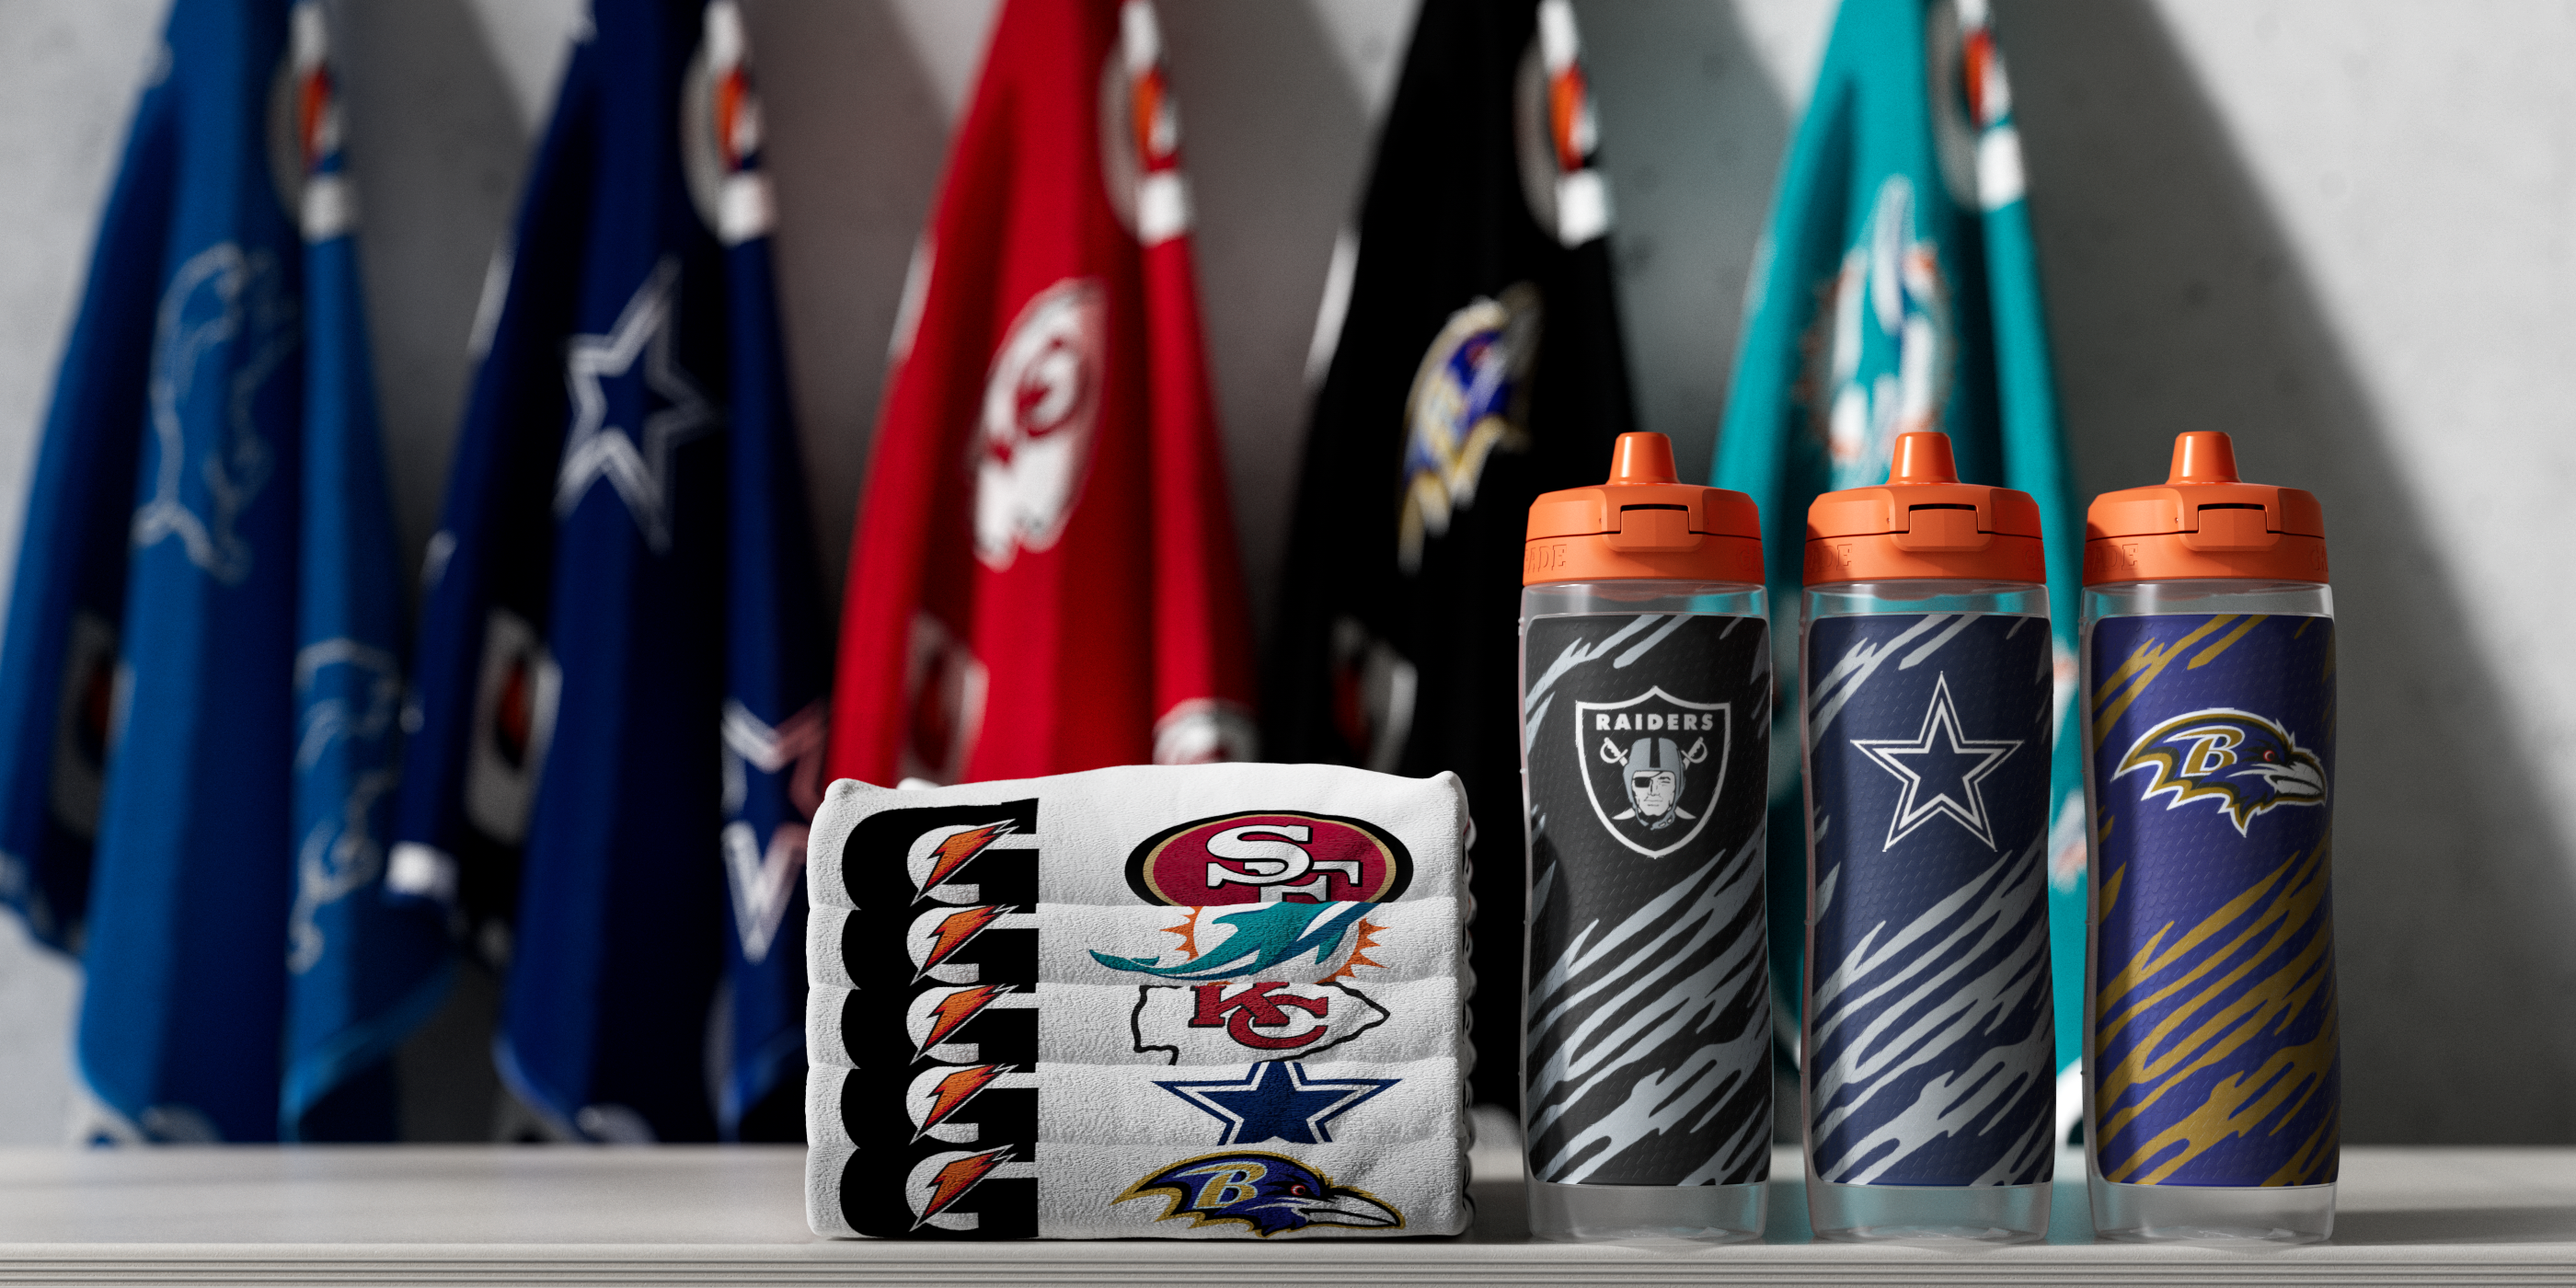 NFL Gx Bottles and Pro Towels